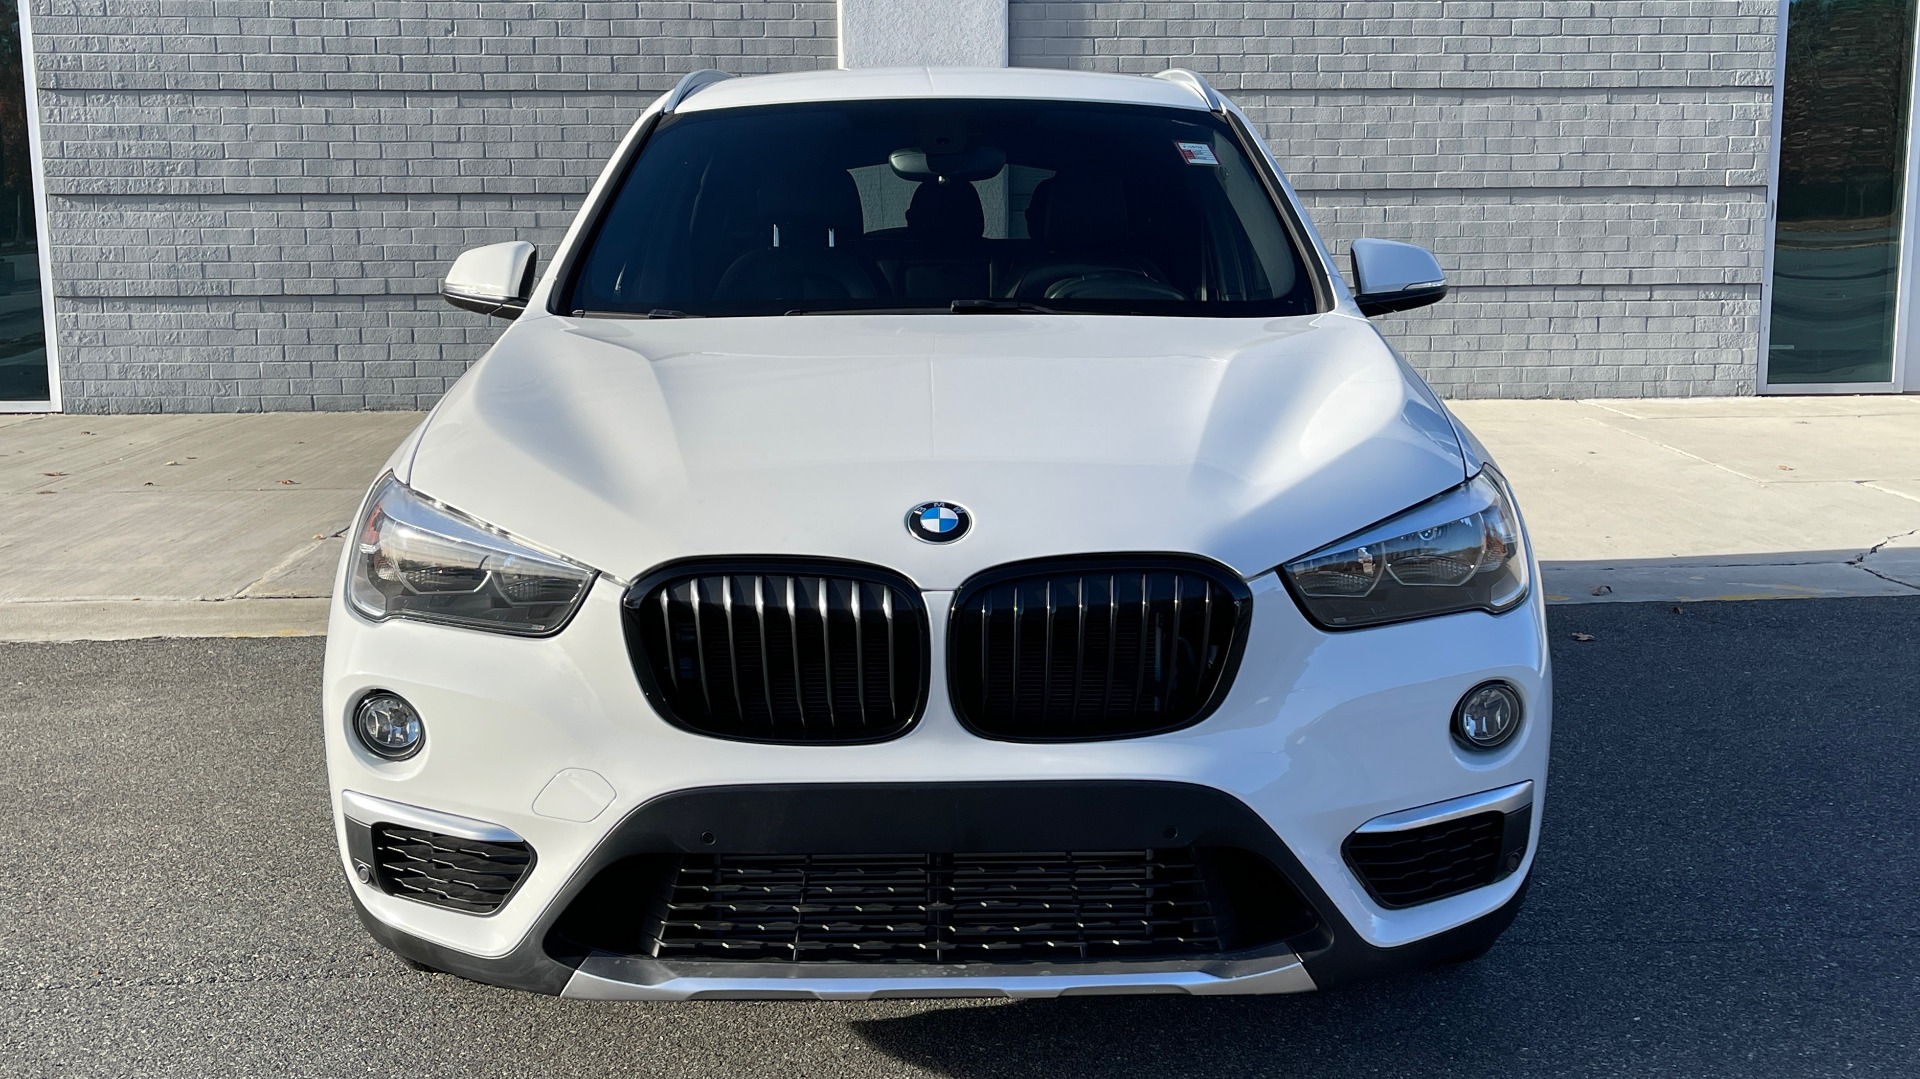 Used 2018 BMW X1 SDRIVE28I 2.0L / PARK DIST CNTRL / 18IN WHEELS / REARVIEW for sale Sold at Formula Imports in Charlotte NC 28227 8